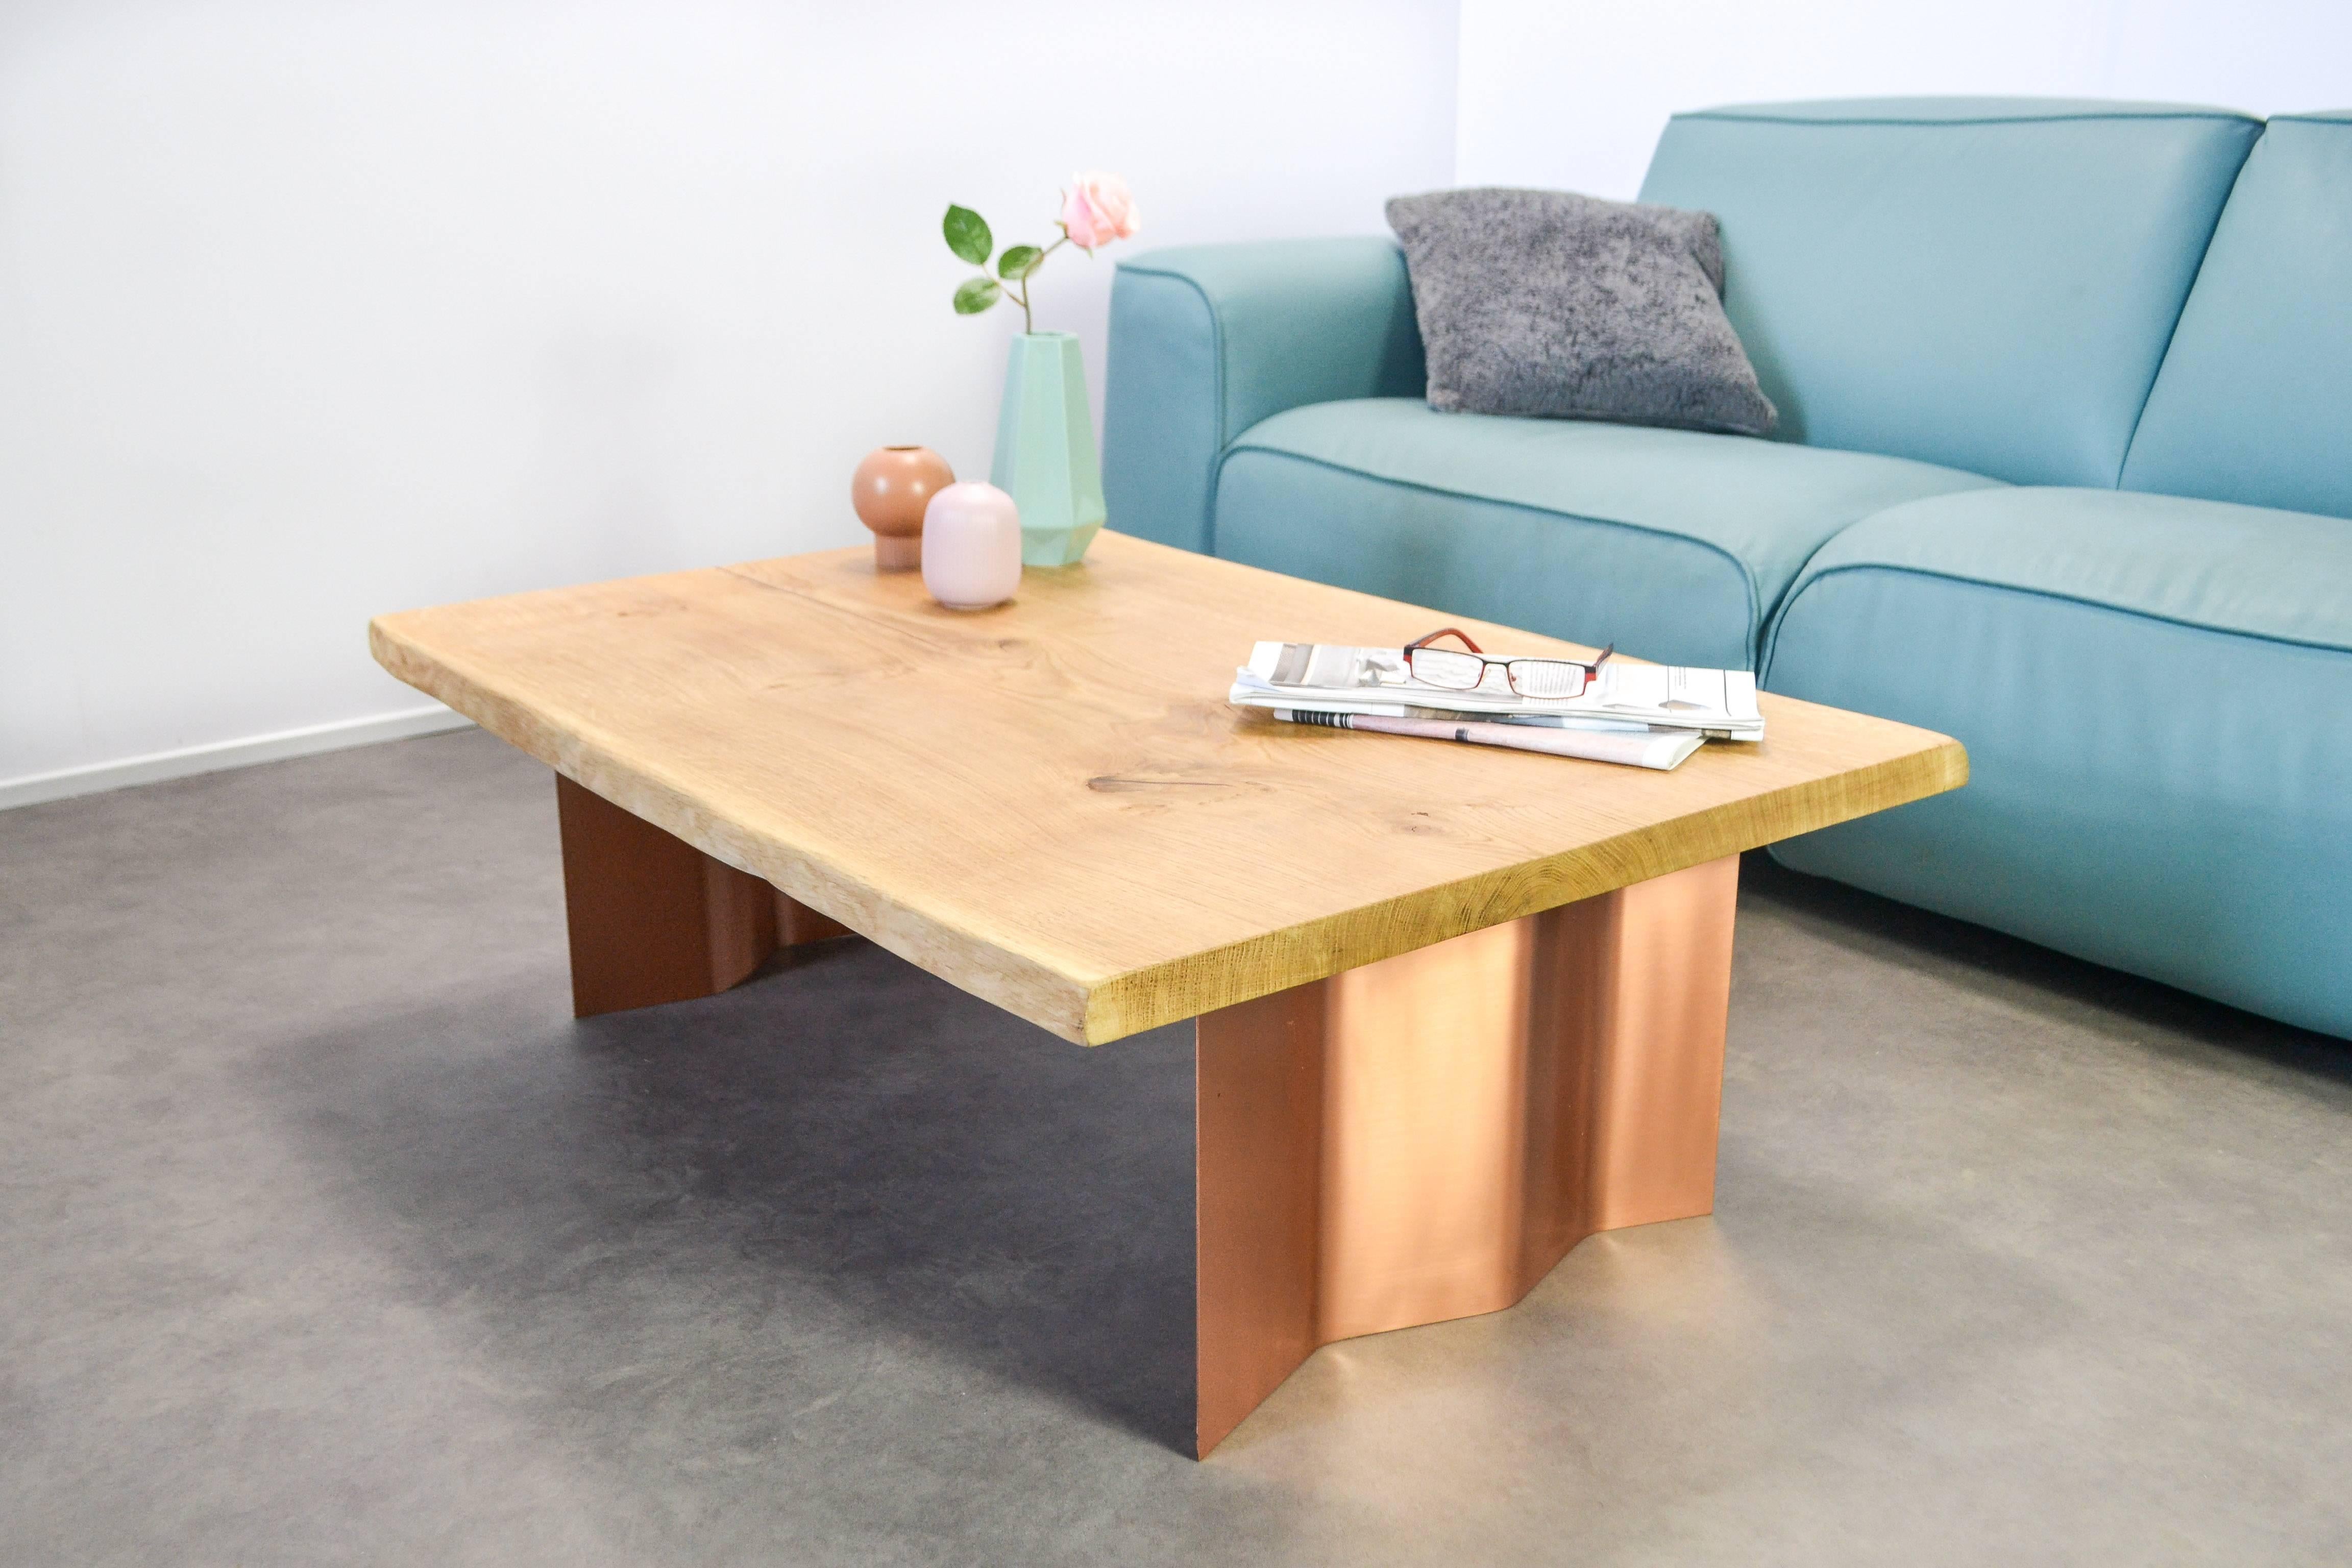 Natural live edge coffee table produced from locally sourced Oak which is sensitively treated to preserve and enhance the natural character, with natural splits infilled with a red resin to complement the modern wave base. 

The copper wave legs are